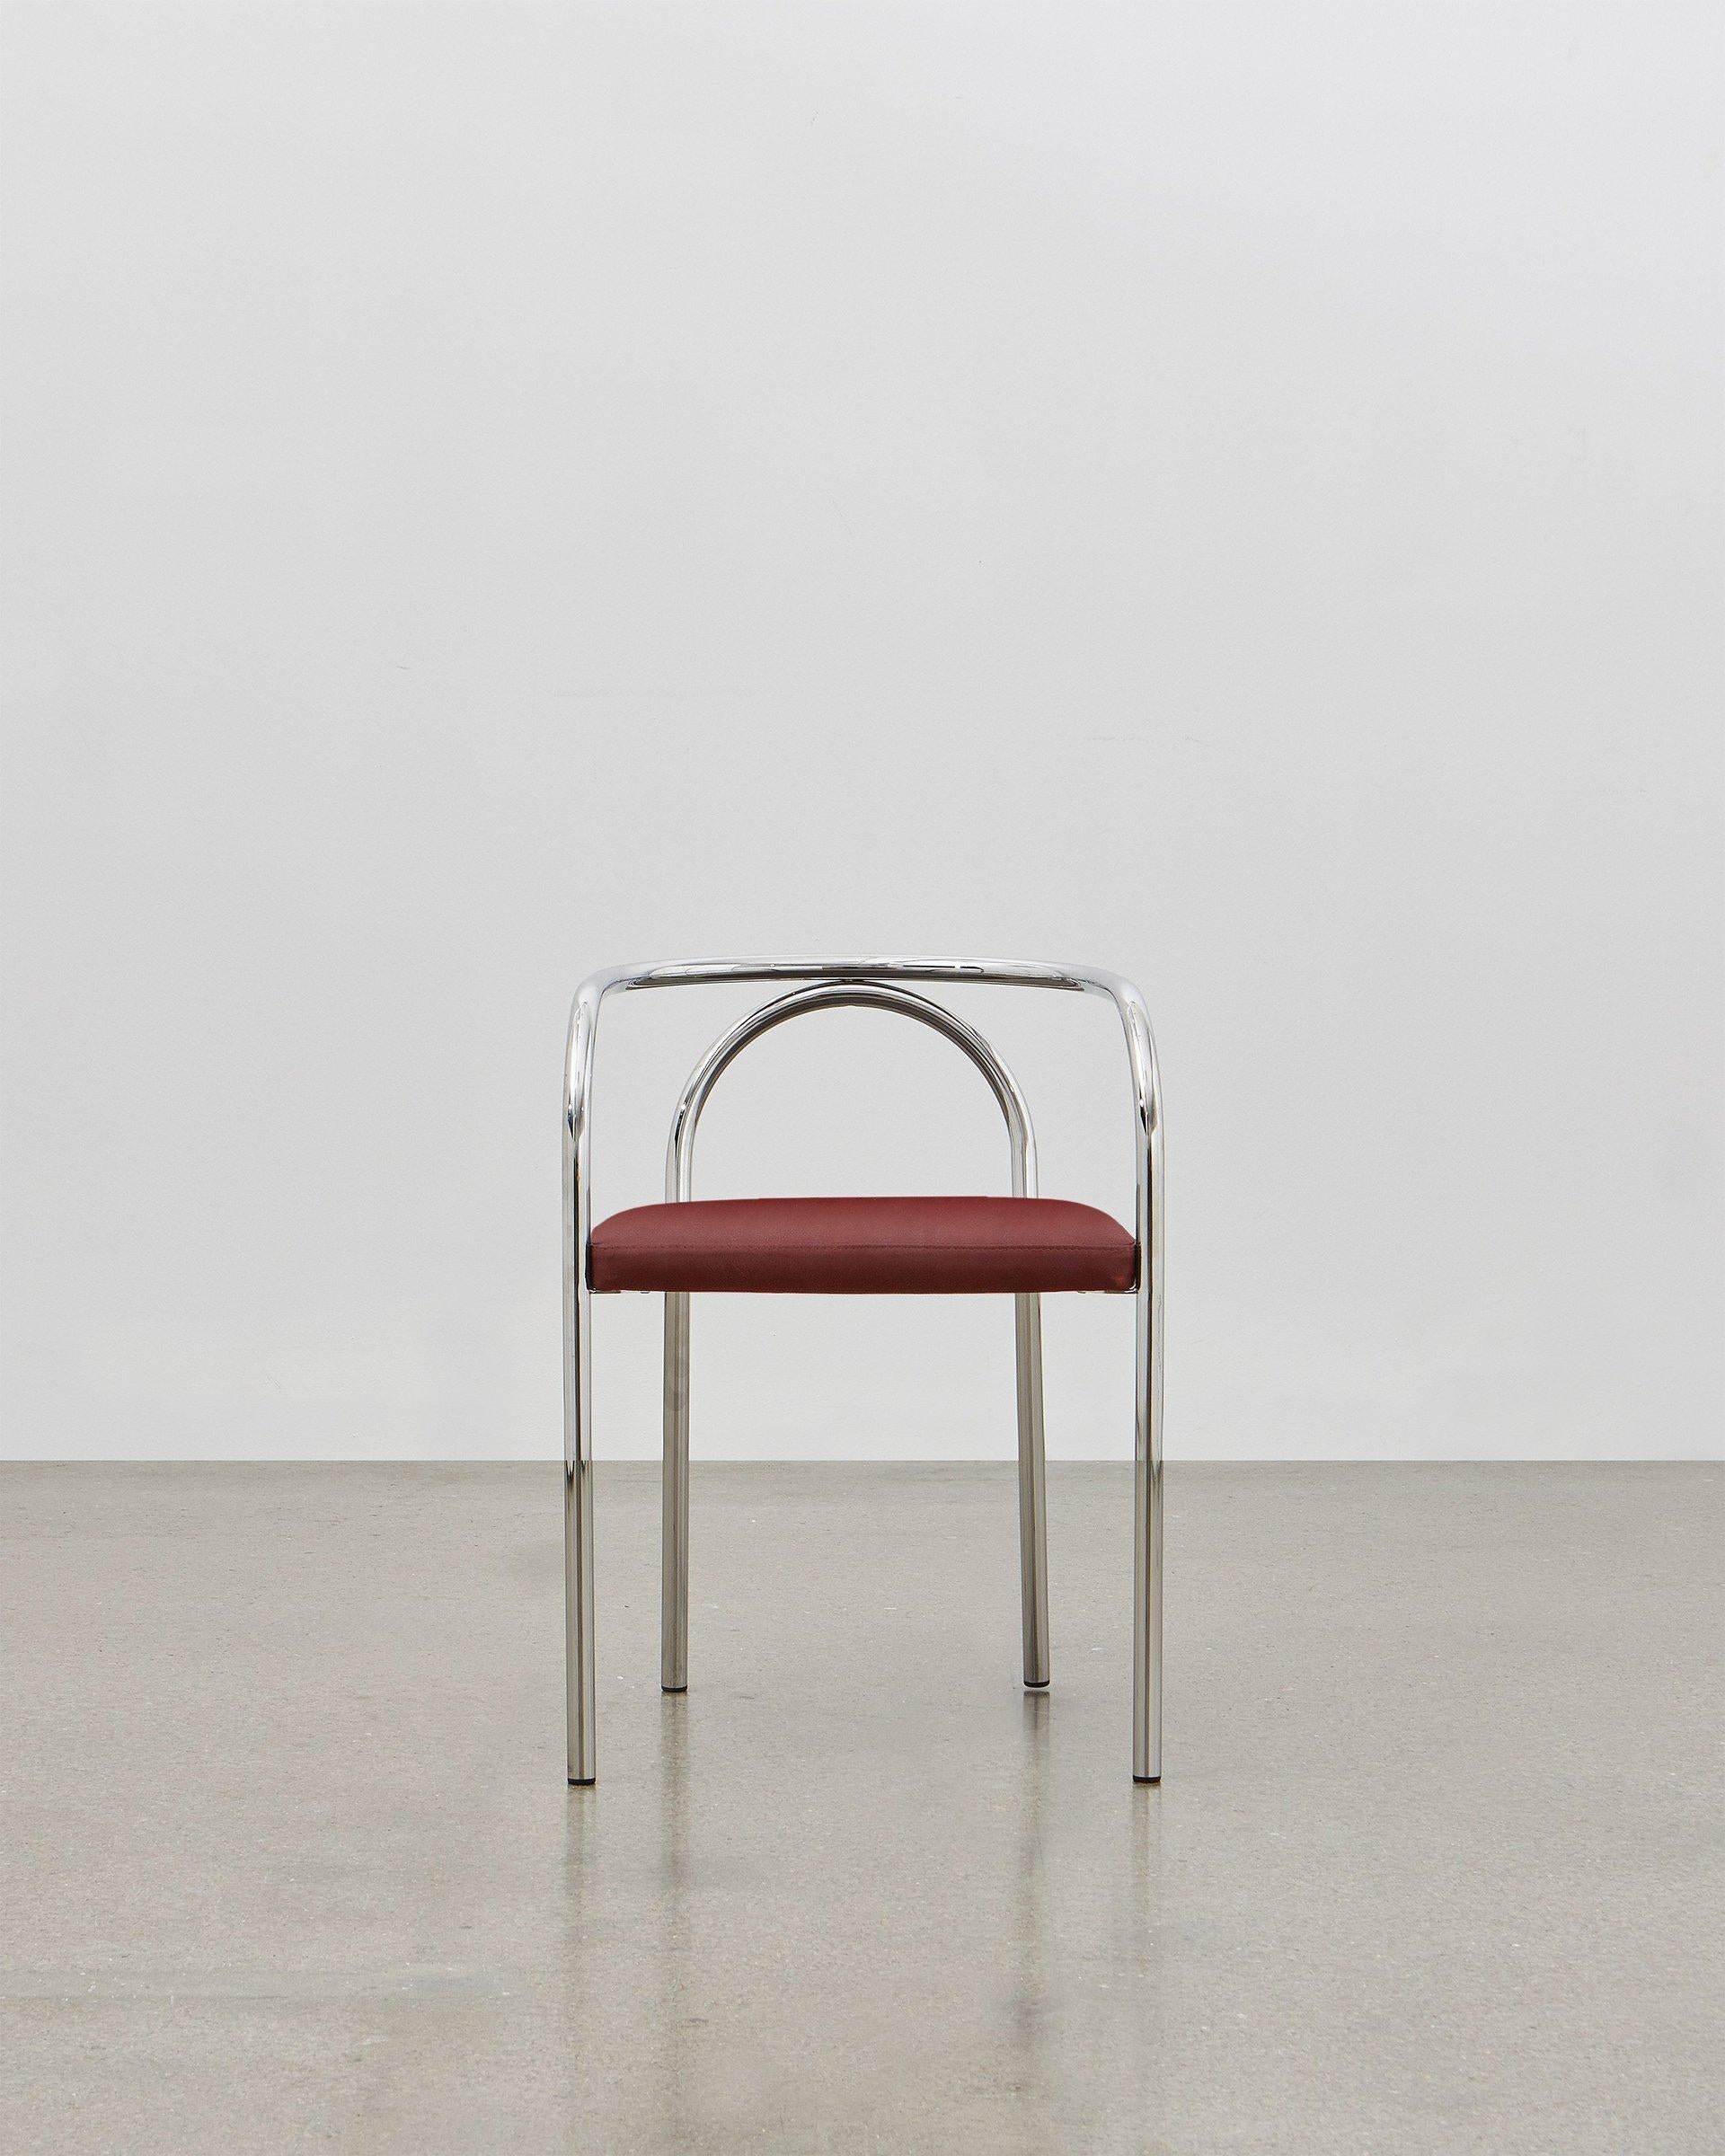 In creating the PH Chair, Poul Henningsen sought to reinvent a number of classic furniture designs that had traditionally been constructed of wood, such as the frequently encountered ‘bistro’ chair. Poul Henningsen saw an opportunity to create a